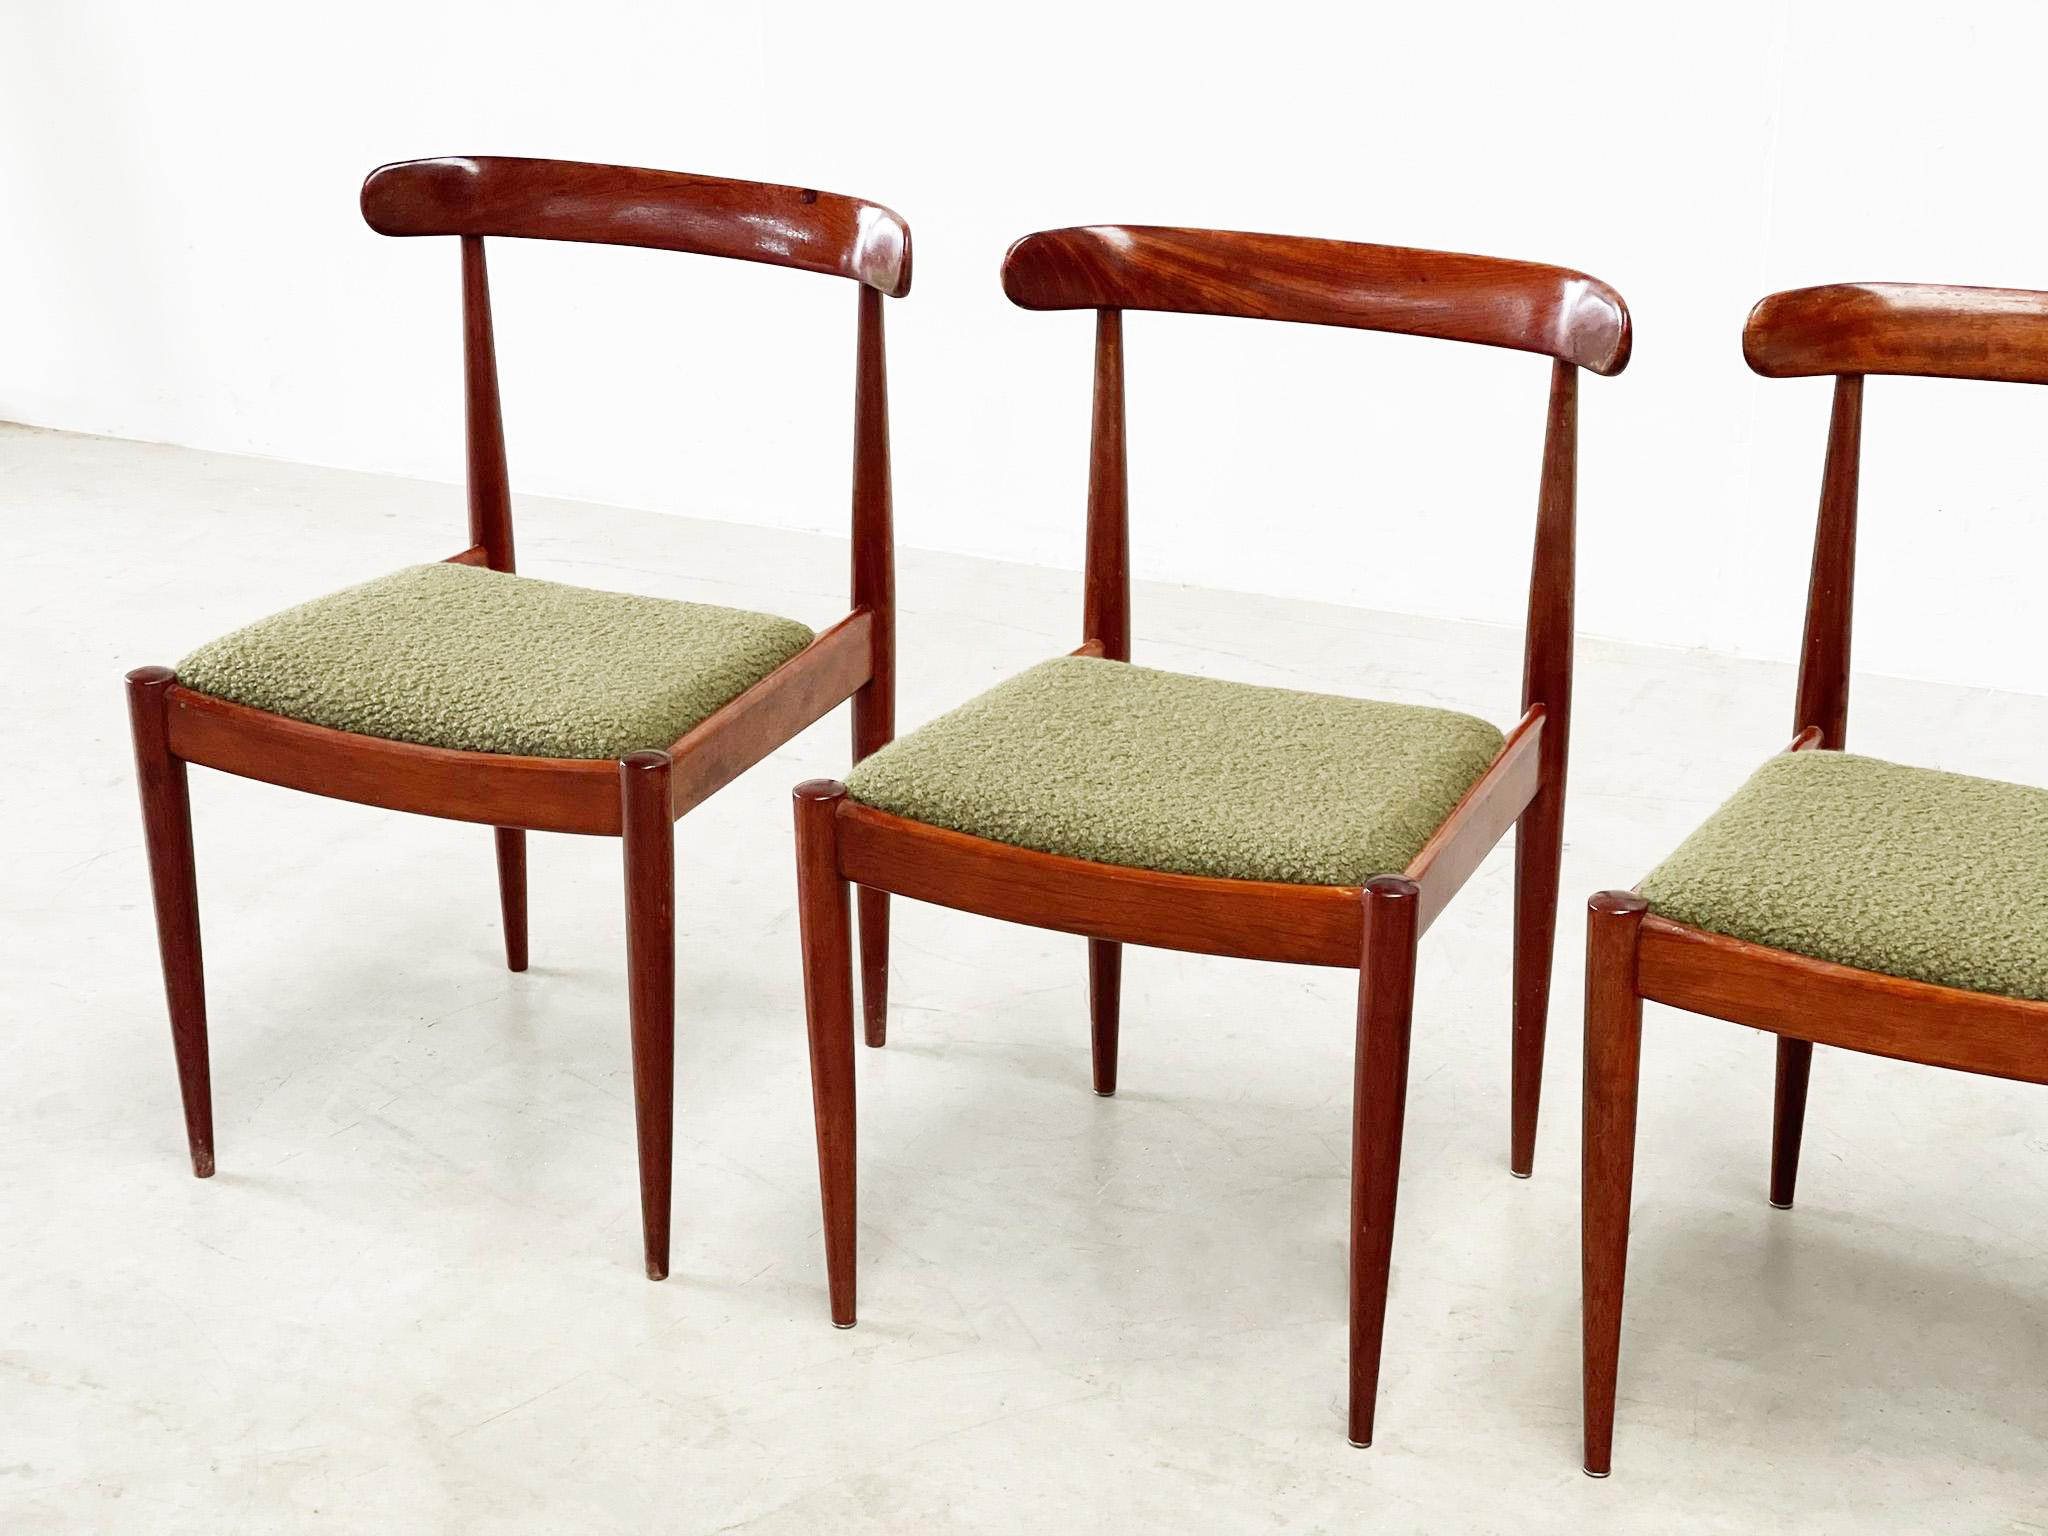 Fantastic Belgian dining chairs

These chairs were designed by one of Belgium's most famous designers Alfred Hendrickx. He designed it in the 1960s for the Belgian manufacturer Belform. This model has the number 500. 

 

The chairs have been